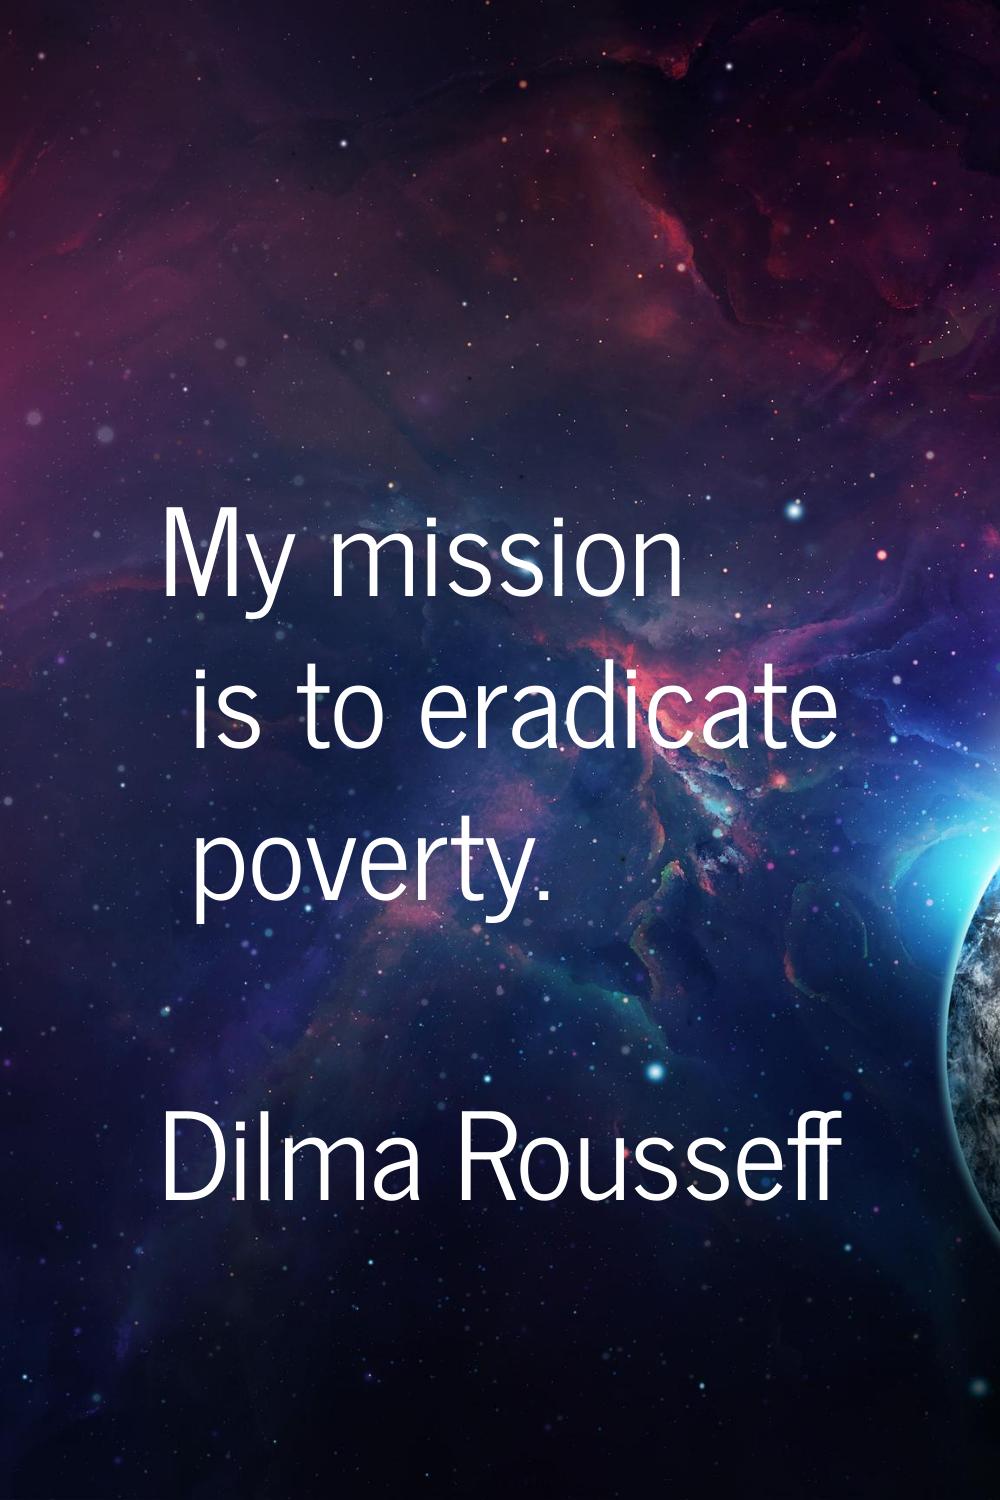 My mission is to eradicate poverty.